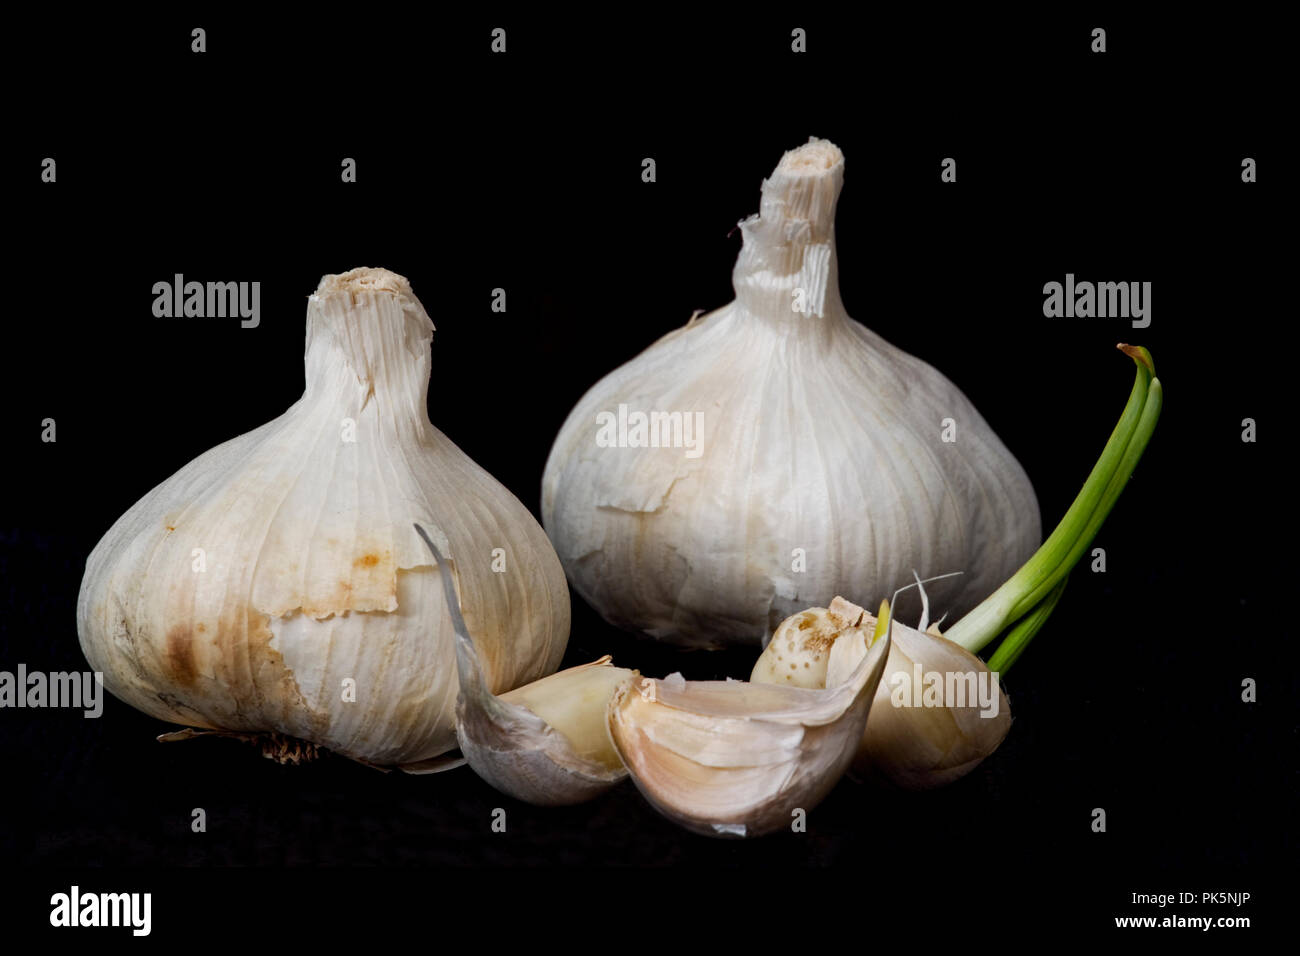 Garlic clusters and cloves closeup isolated on black background. Stock Photo